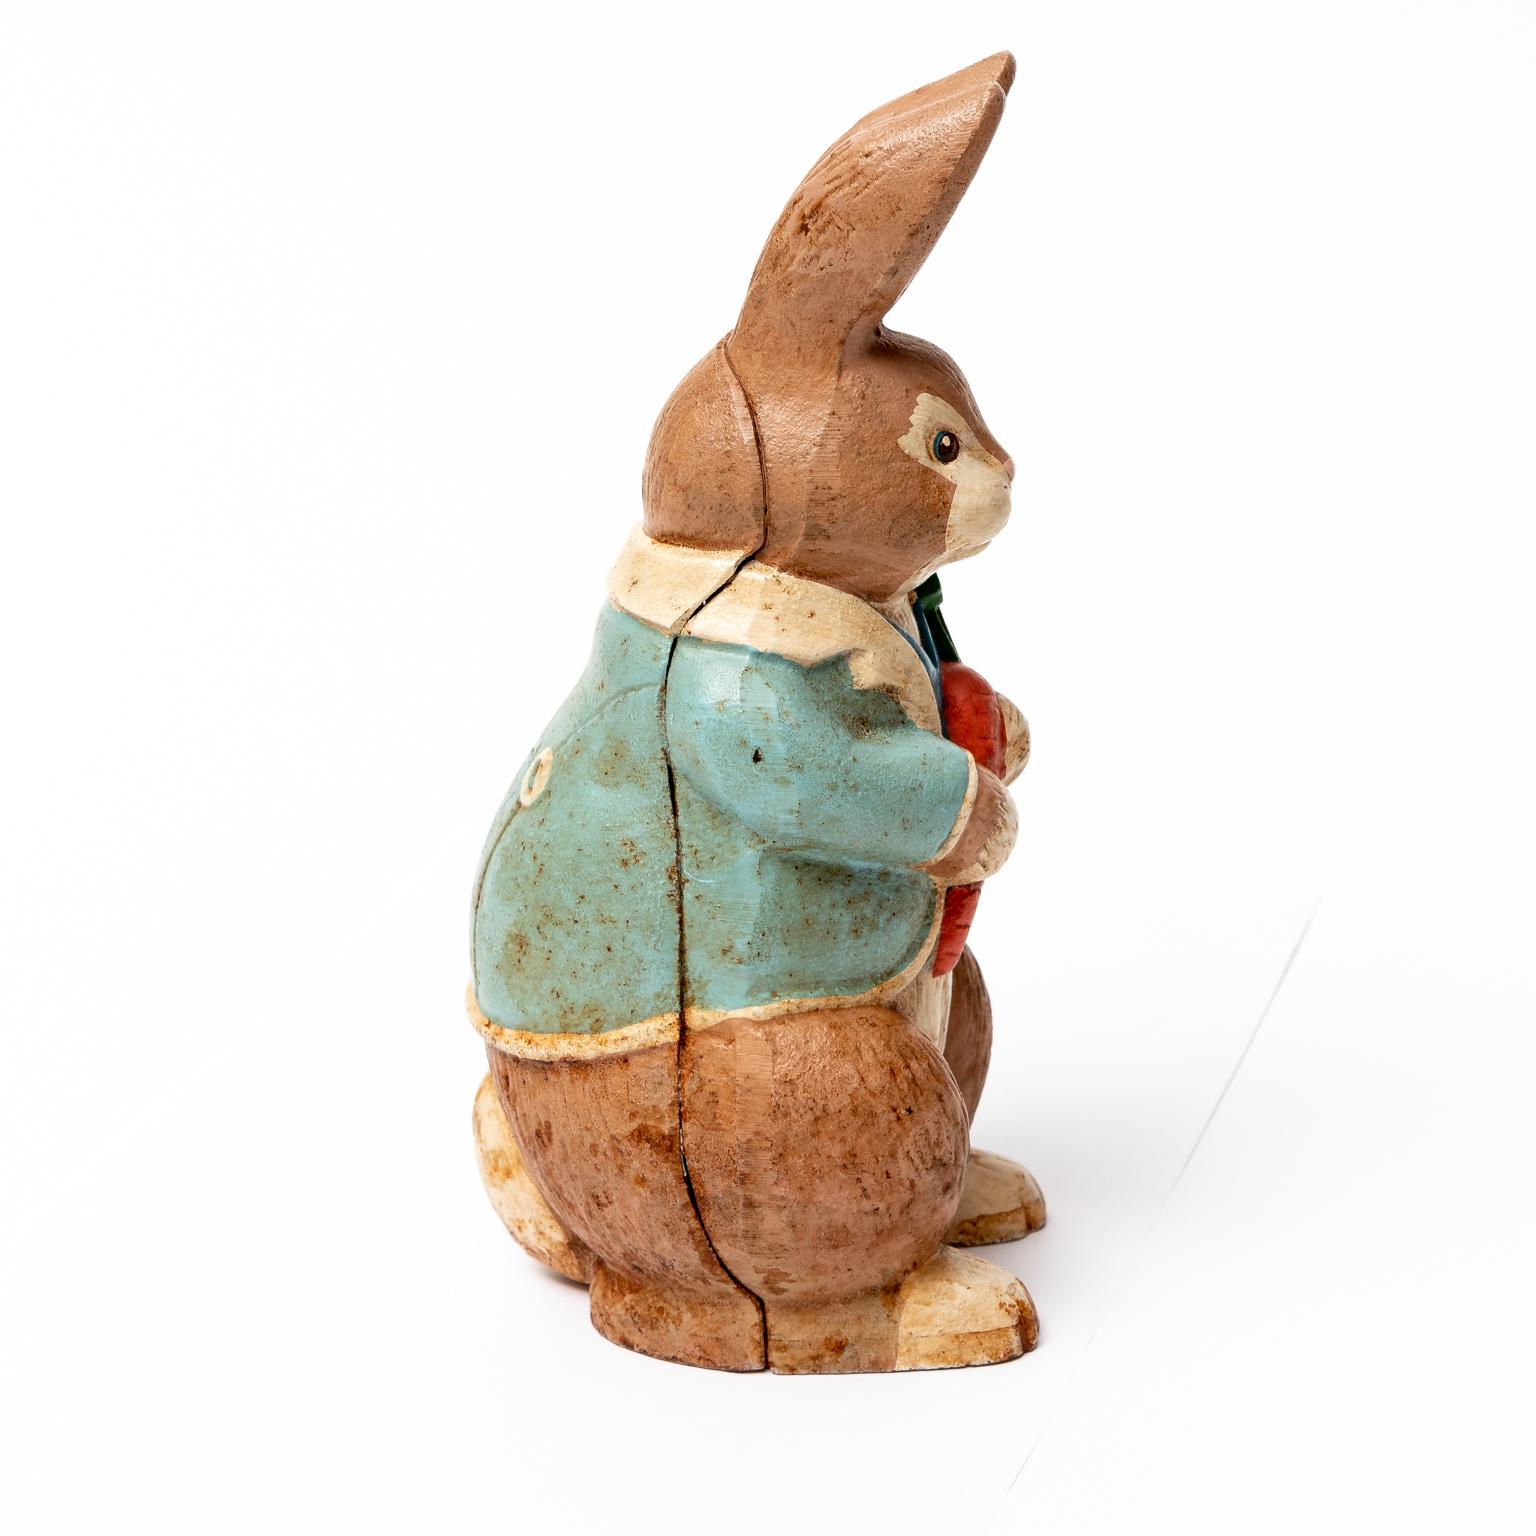 Circa 1960s Japanese cast iron bunny rabbit, 3-826. The piece was hand painted. Made in Japan. Please note of wear consistent with age.